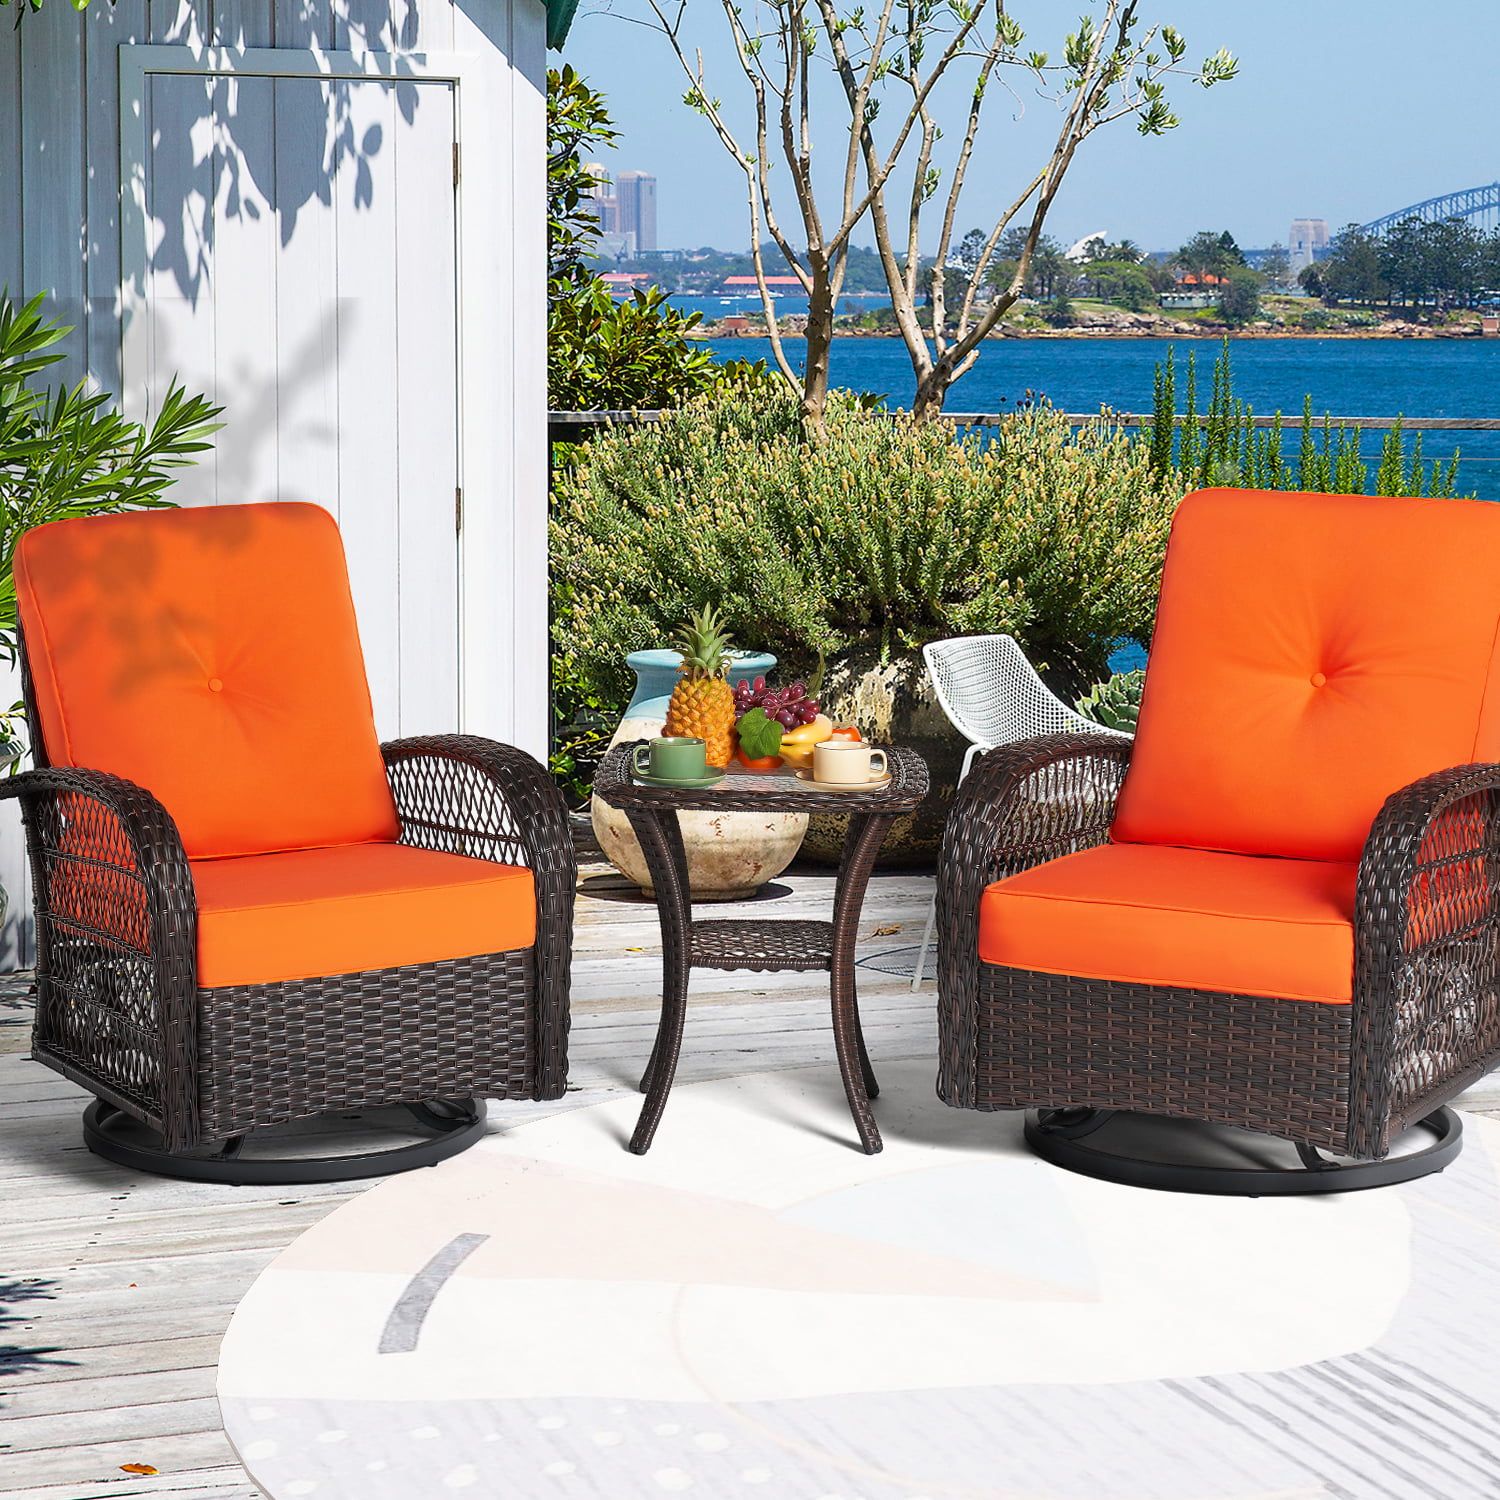 Aoxun 3 Piece Patio Chairs Set, Swivel Rocking Chairs For Patio, Wicker  Bistro Set With Orange Cushions, Outdoor Swivel Rocker – Walmart With 3 Piece Cushion Rocking Chair Set (View 14 of 15)